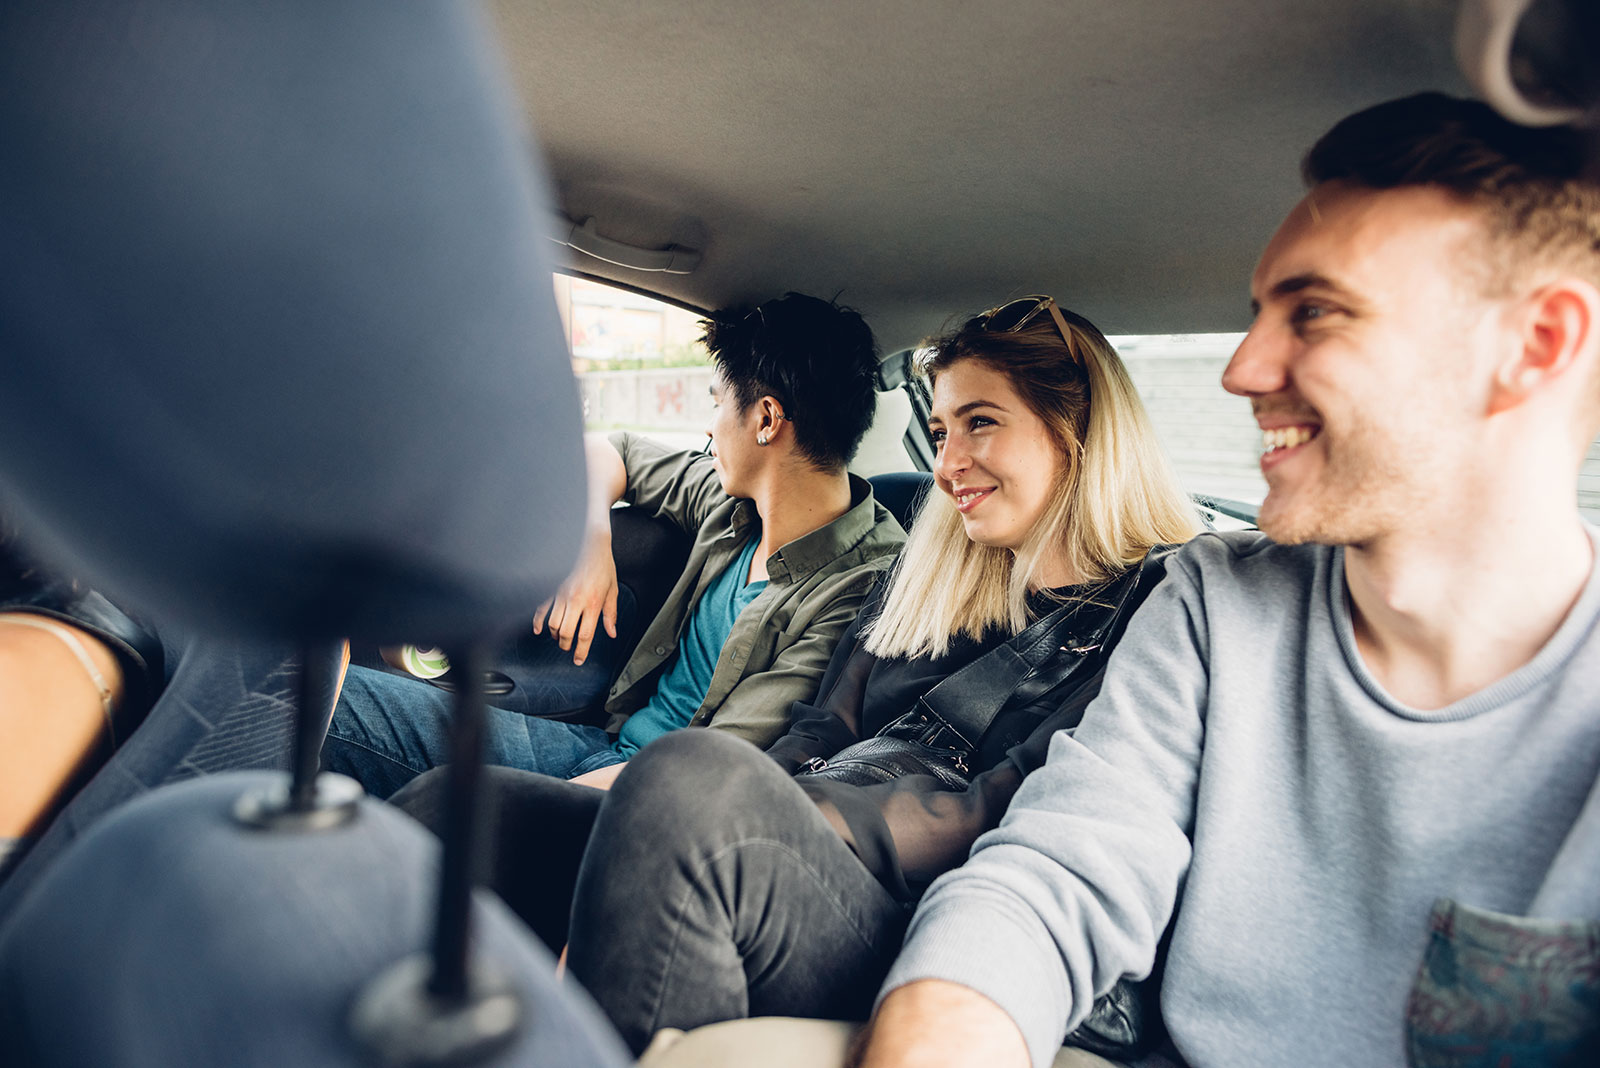 Group of three young adults riding in the backseat of a ride-share car